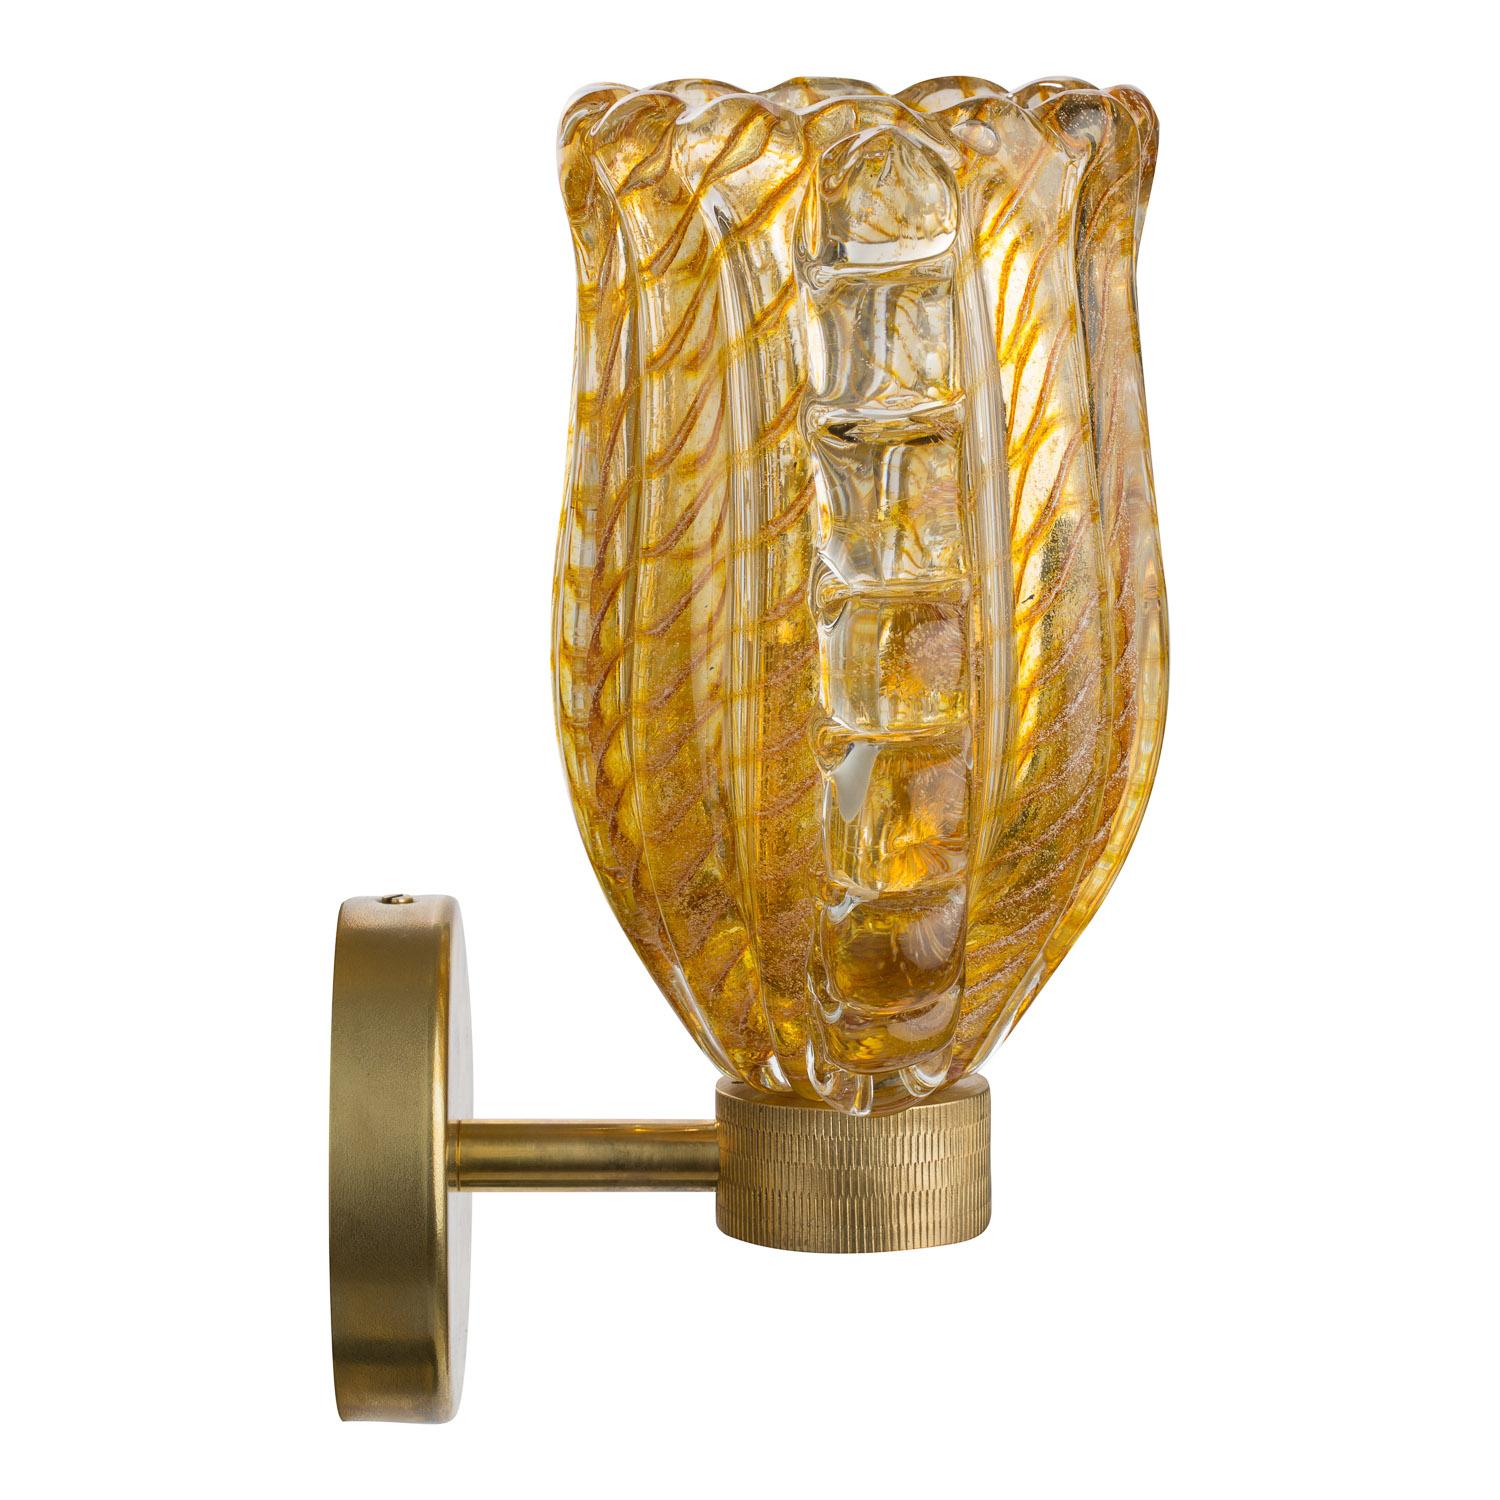 Hand-Carved Unique Murano Art Glass Sconces in Cristallo 24ct Gold Leaf & Amber Candy Canes For Sale